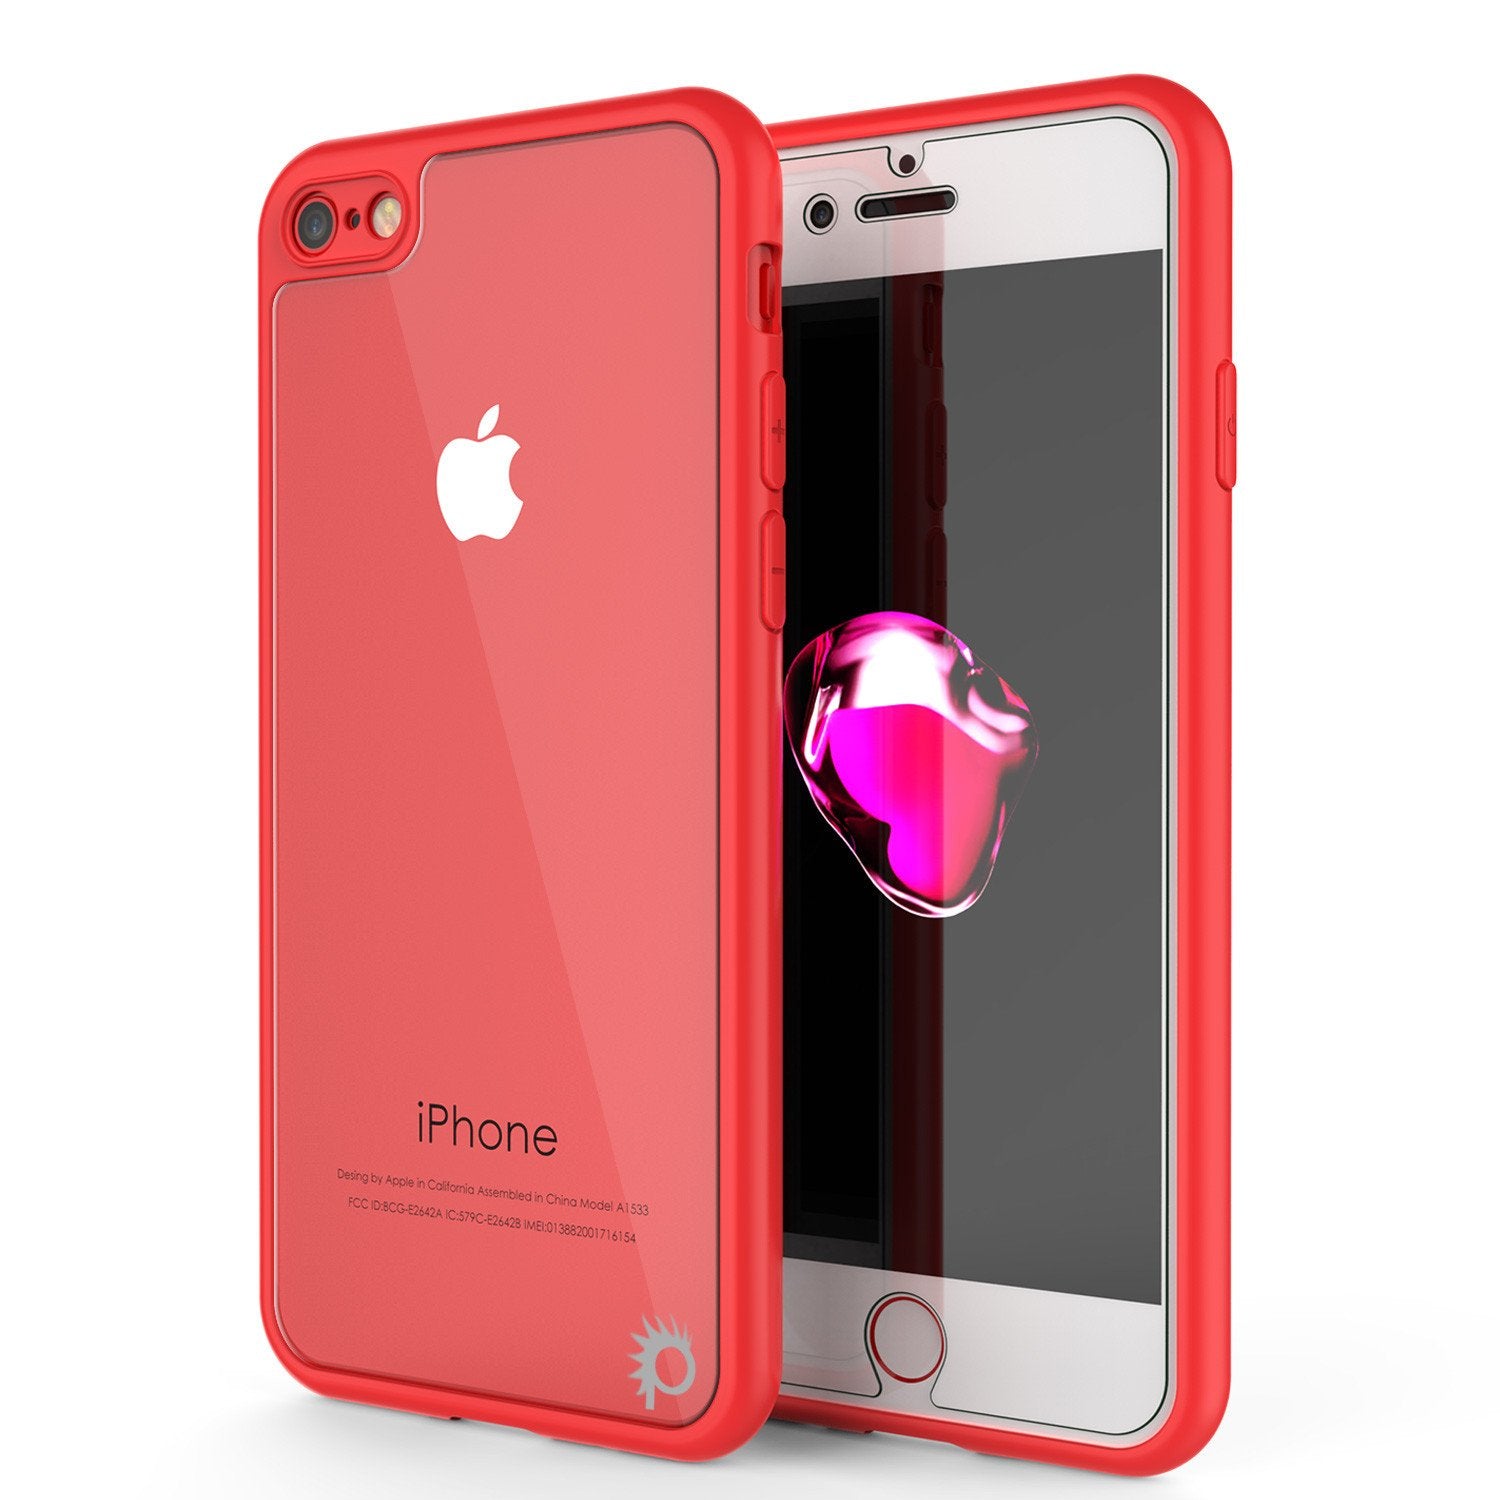 iPhone 7 Case [MASK Series] [RED] Full Body Hybrid Dual Layer TPU Cover W/ protective Tempered Glass Screen Protector